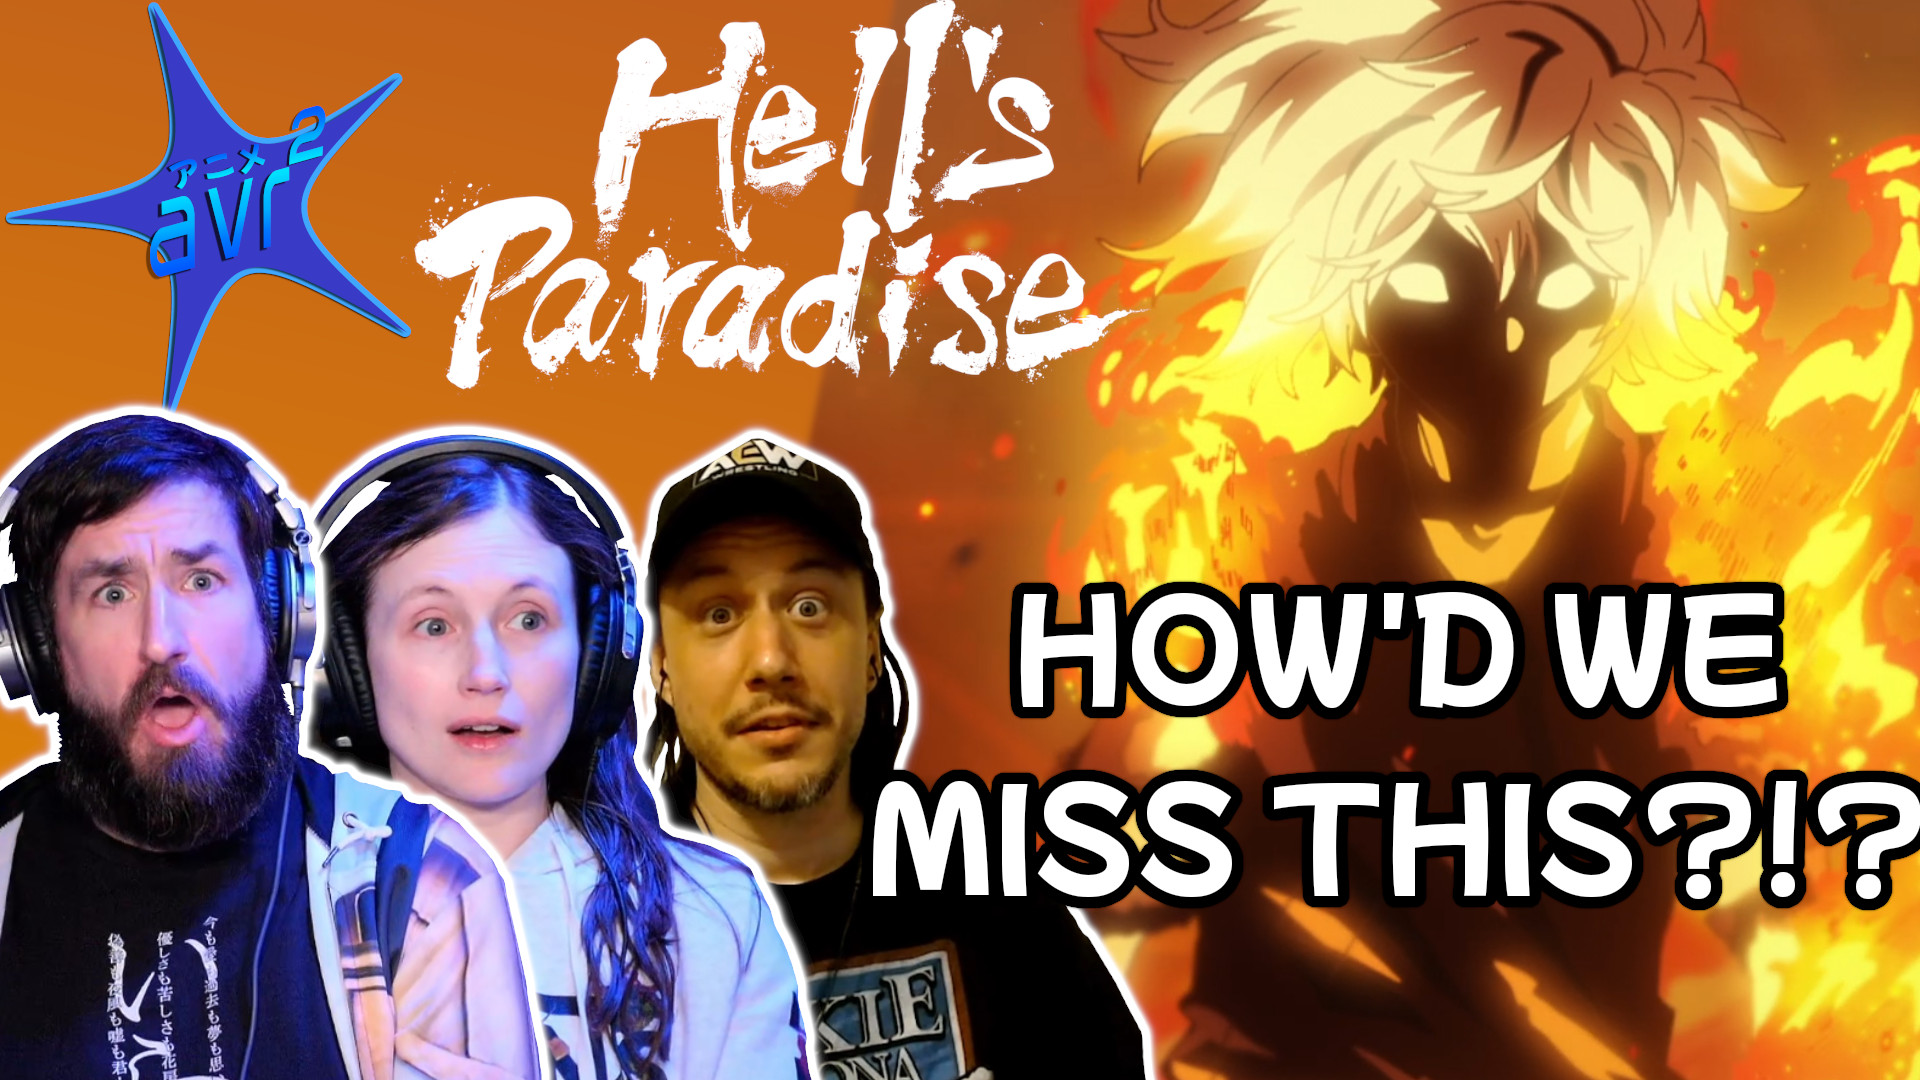 HOW DID WE MISS THIS?!?: Hell’s Paradise Episode 1 Reaction | AVR2